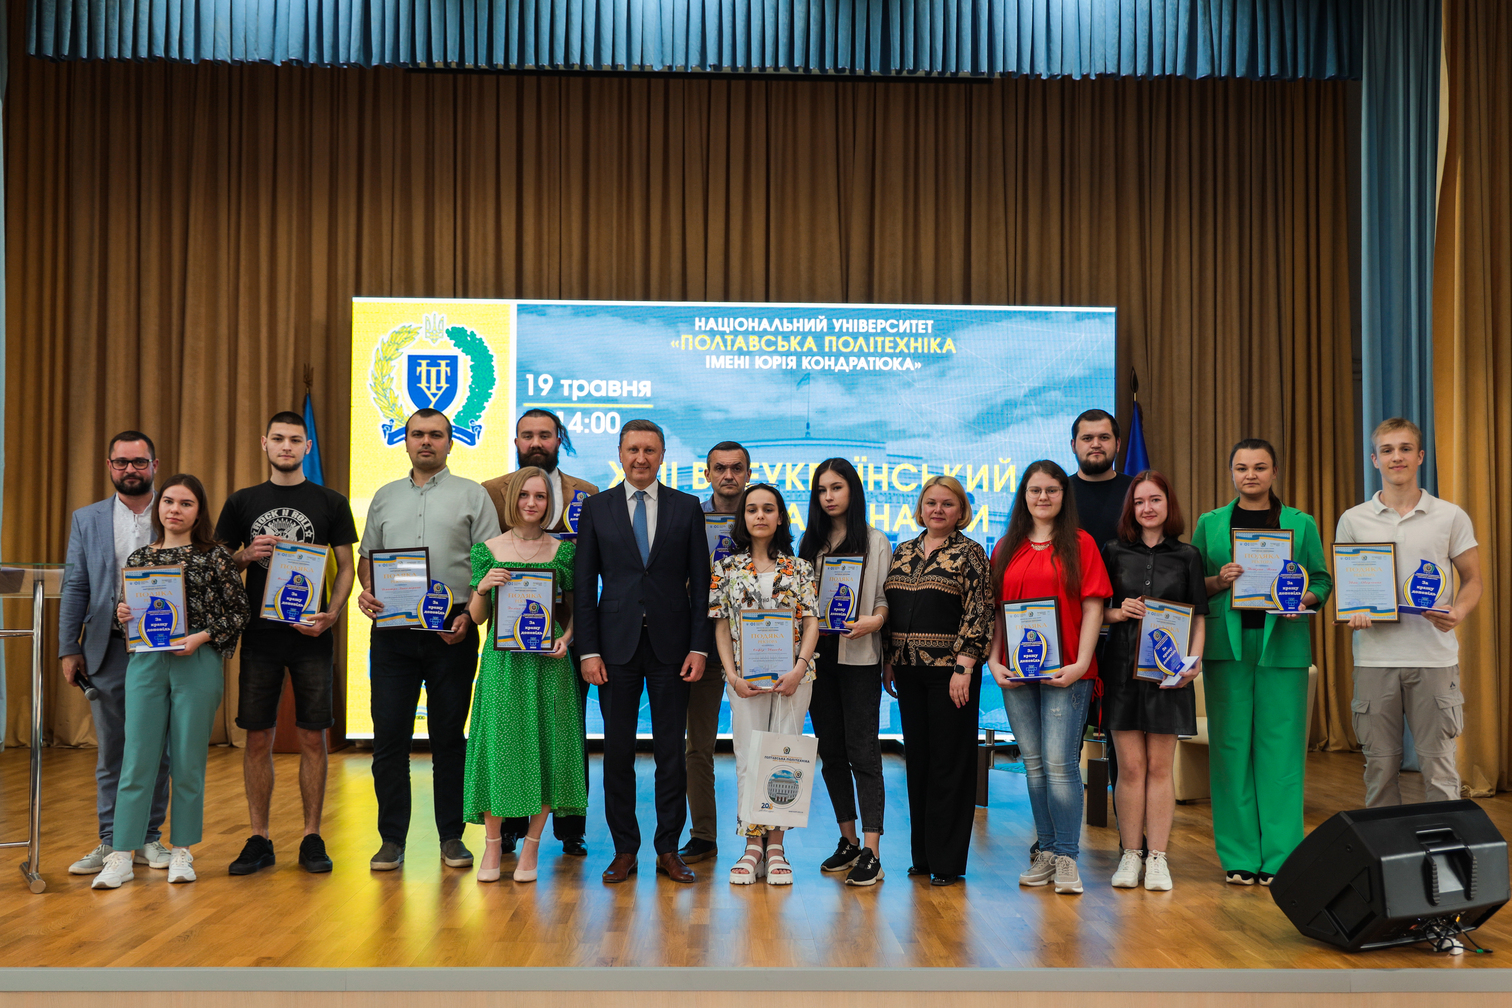 Poltava Polytechnic students are awarded for significant scientific and educational achievements and participation in the Science Festival